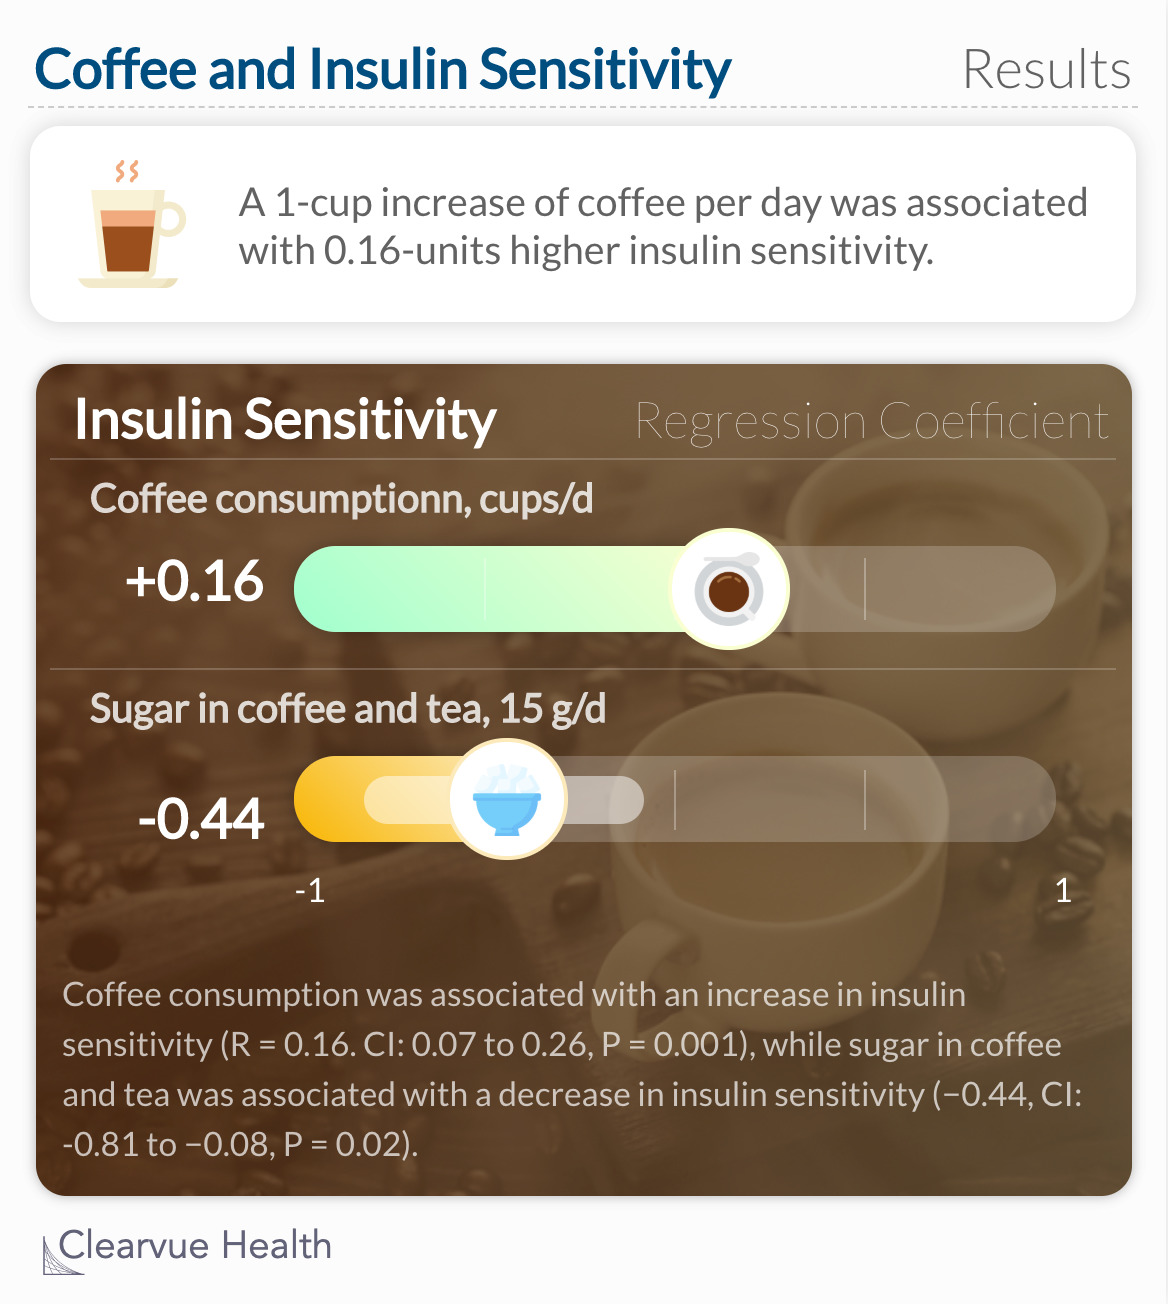 A 1-cup increase of coffee per day was associated with 0.16-units higher insulin sensitivity. 